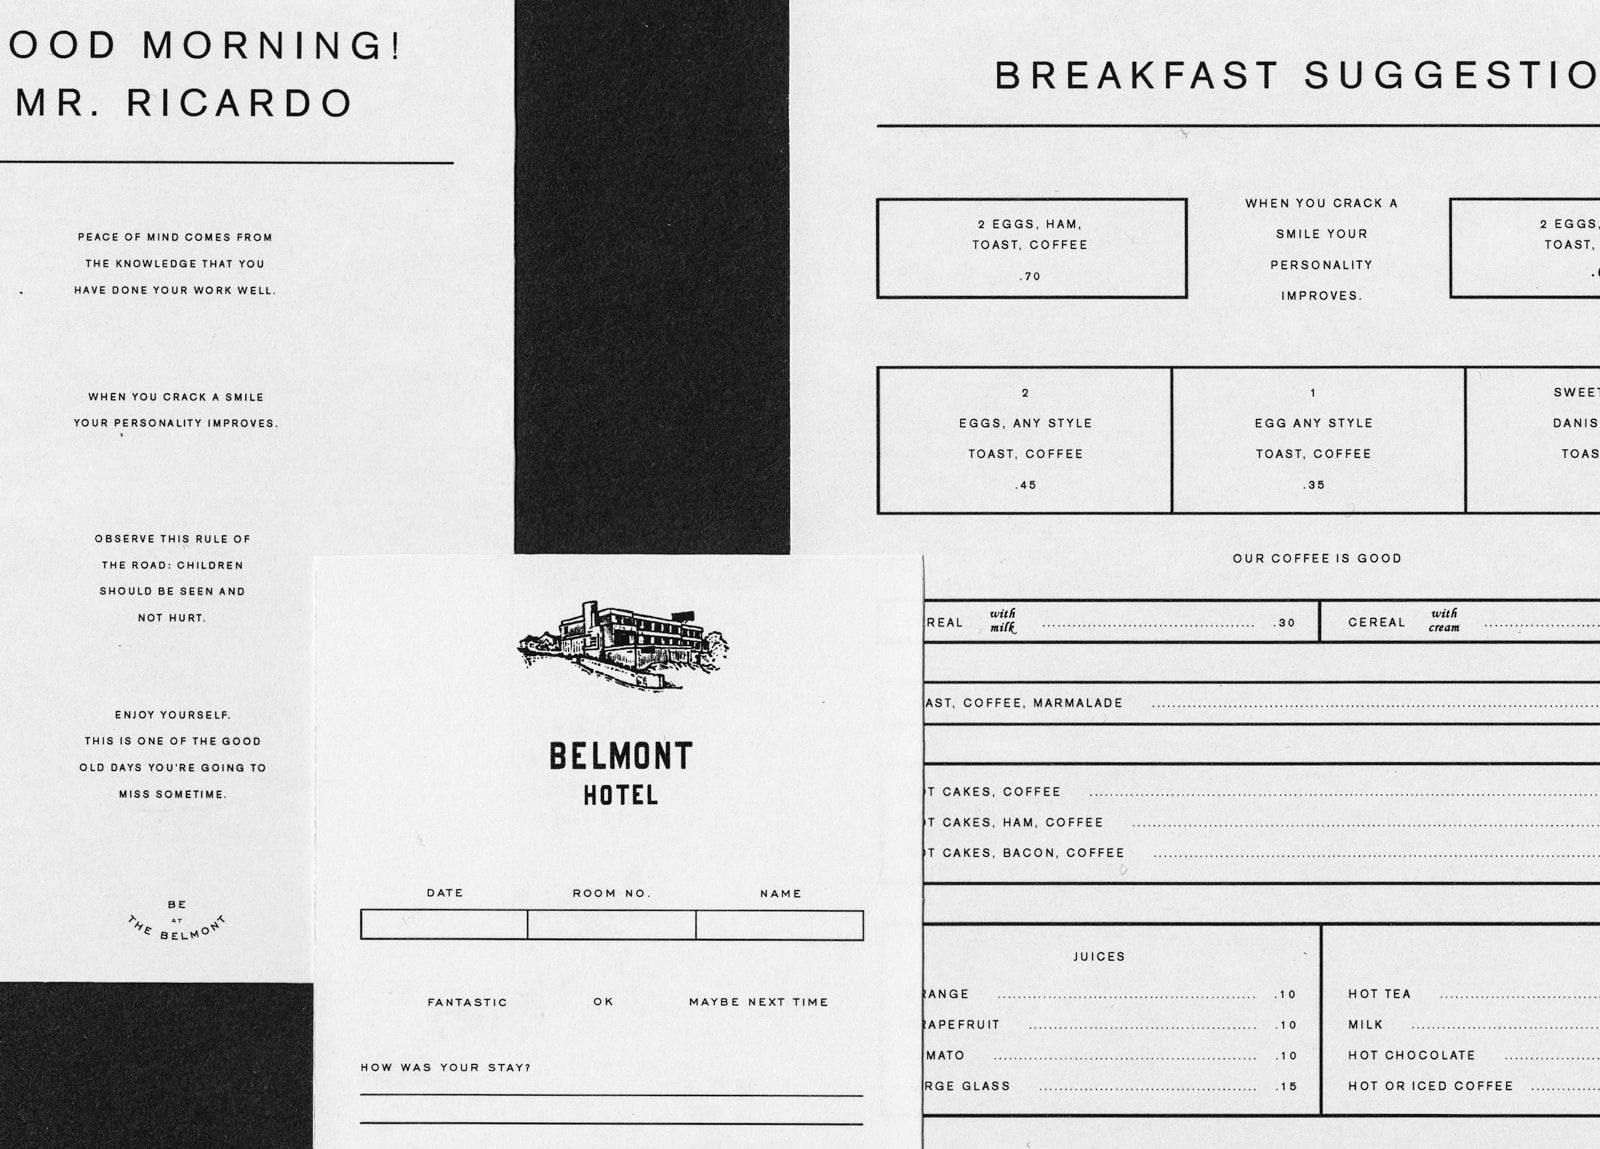 Review form and breakfast menu for Belmont Hotel